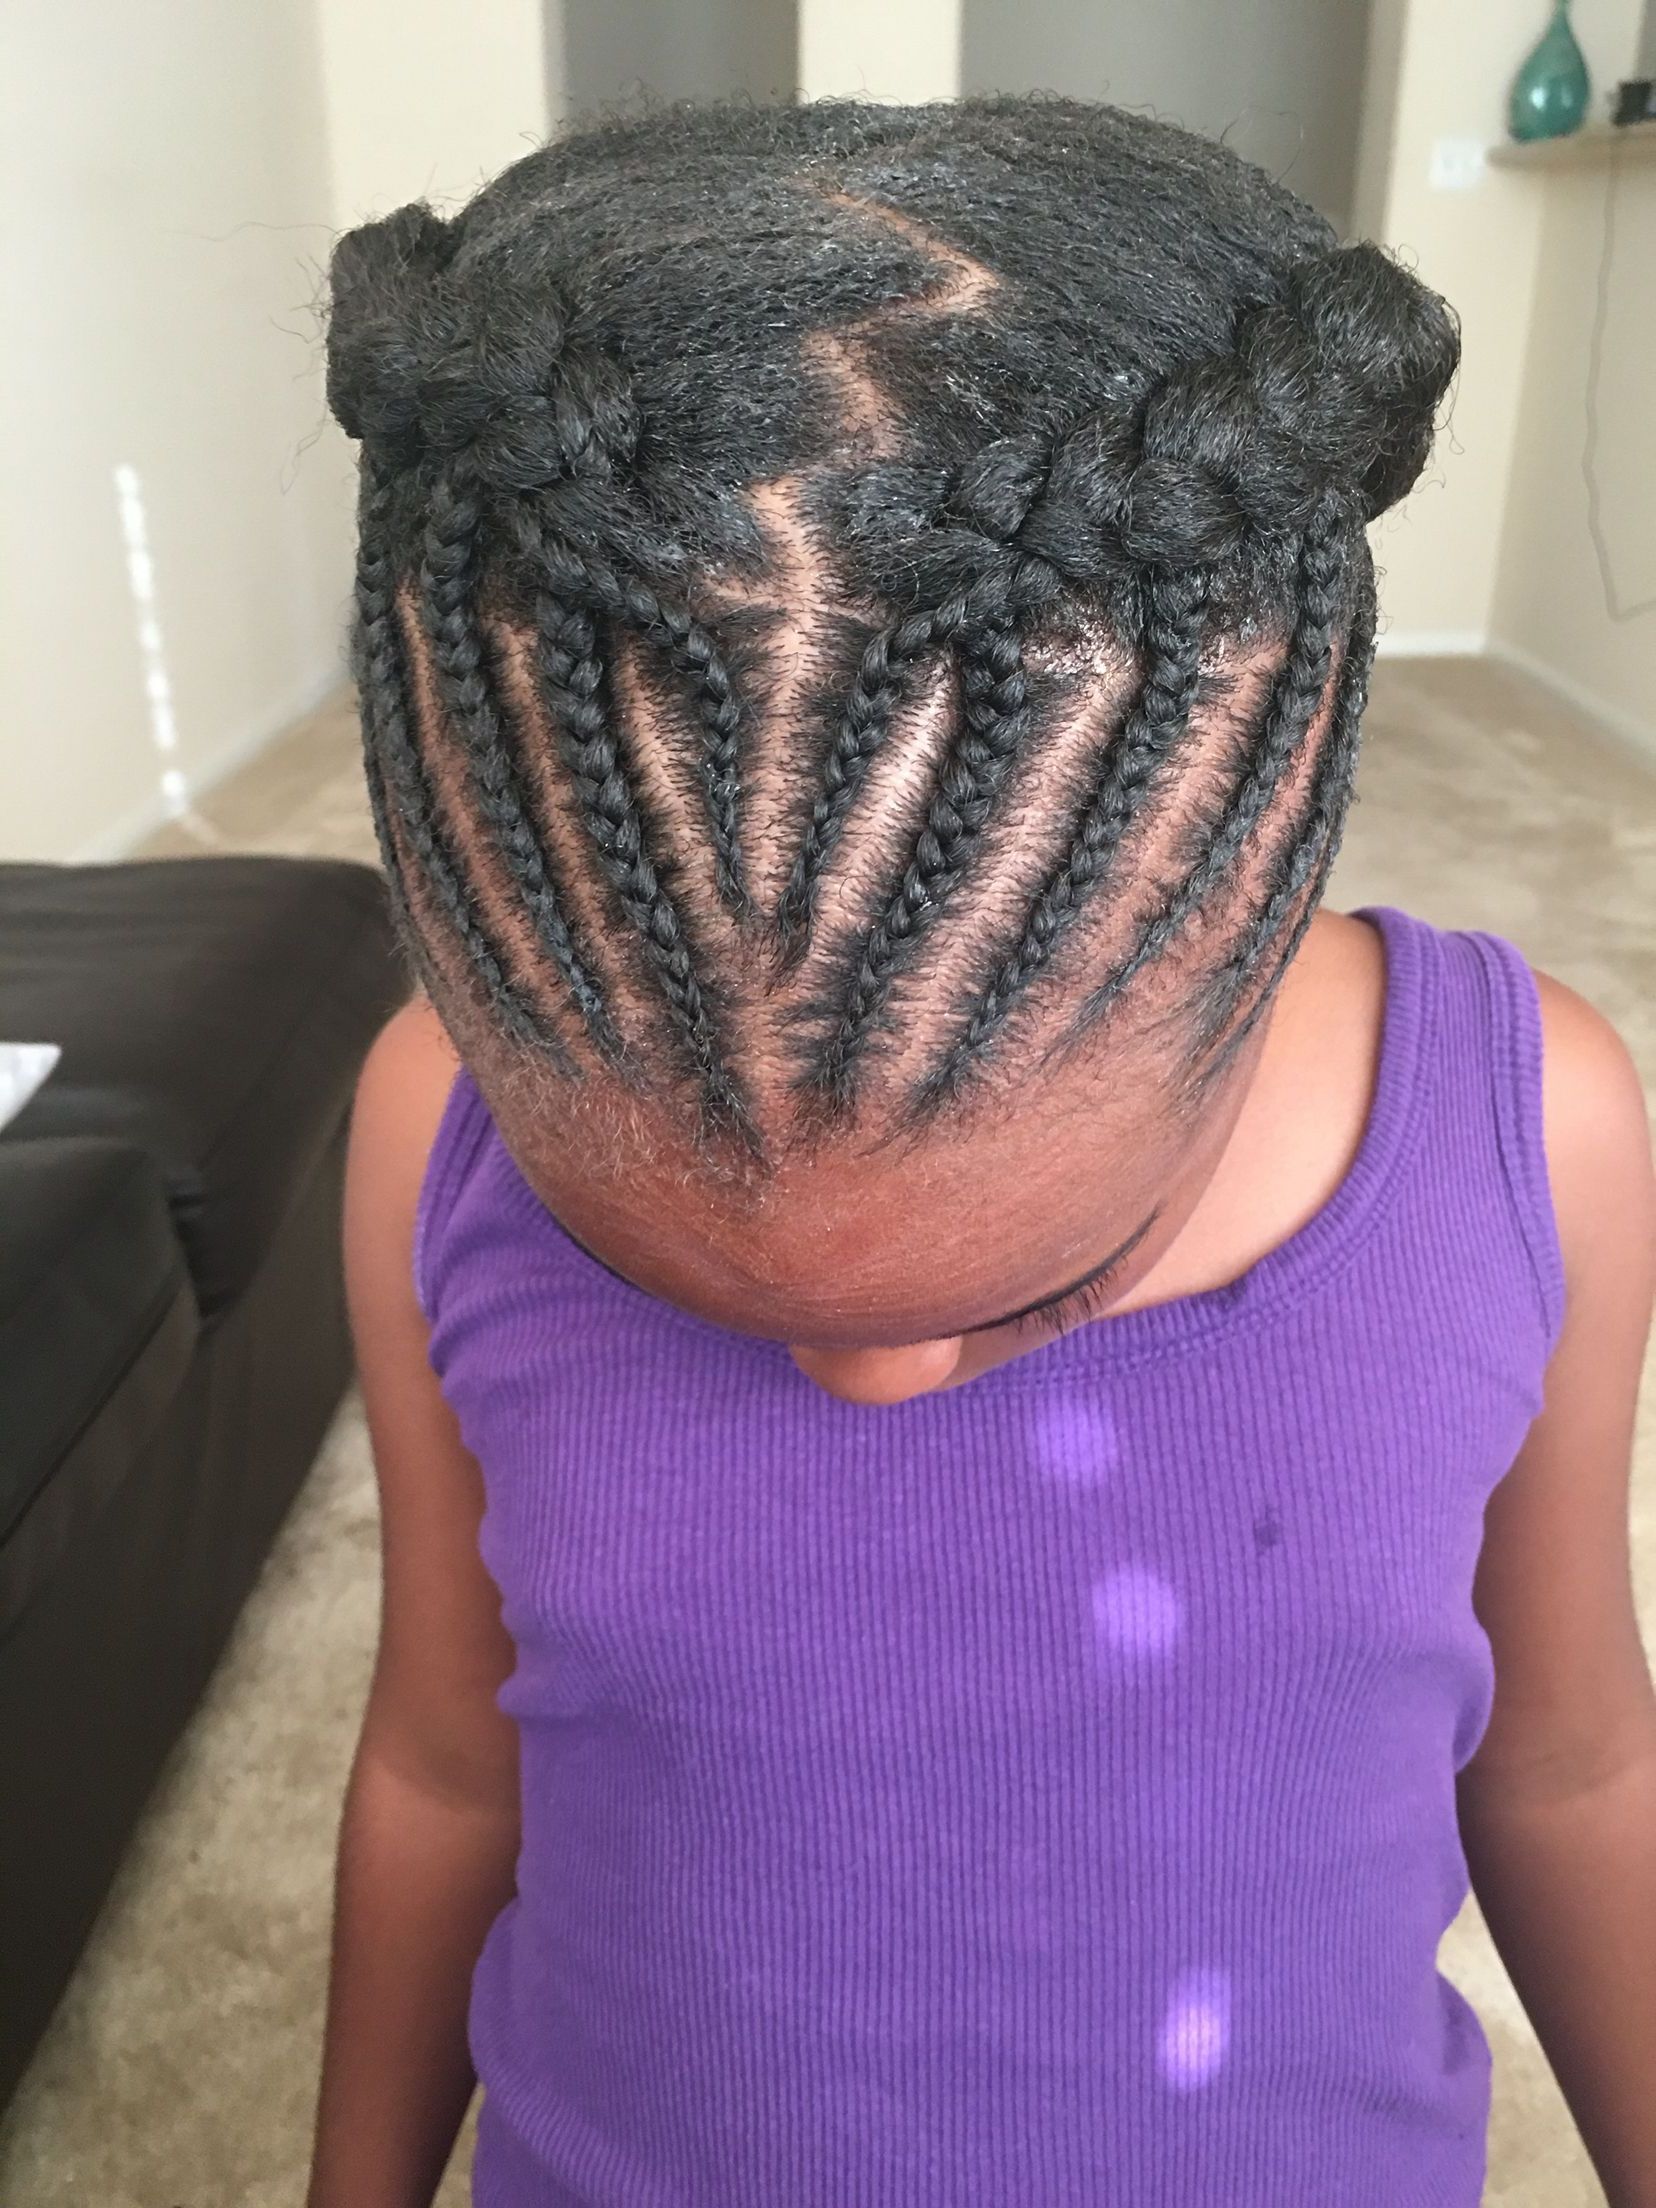 Most Recent No Pin Halo Braided Hairstyles Within Goddess Braids, Half Braided, Halo, Beehive, Black Girl Hair (View 20 of 20)